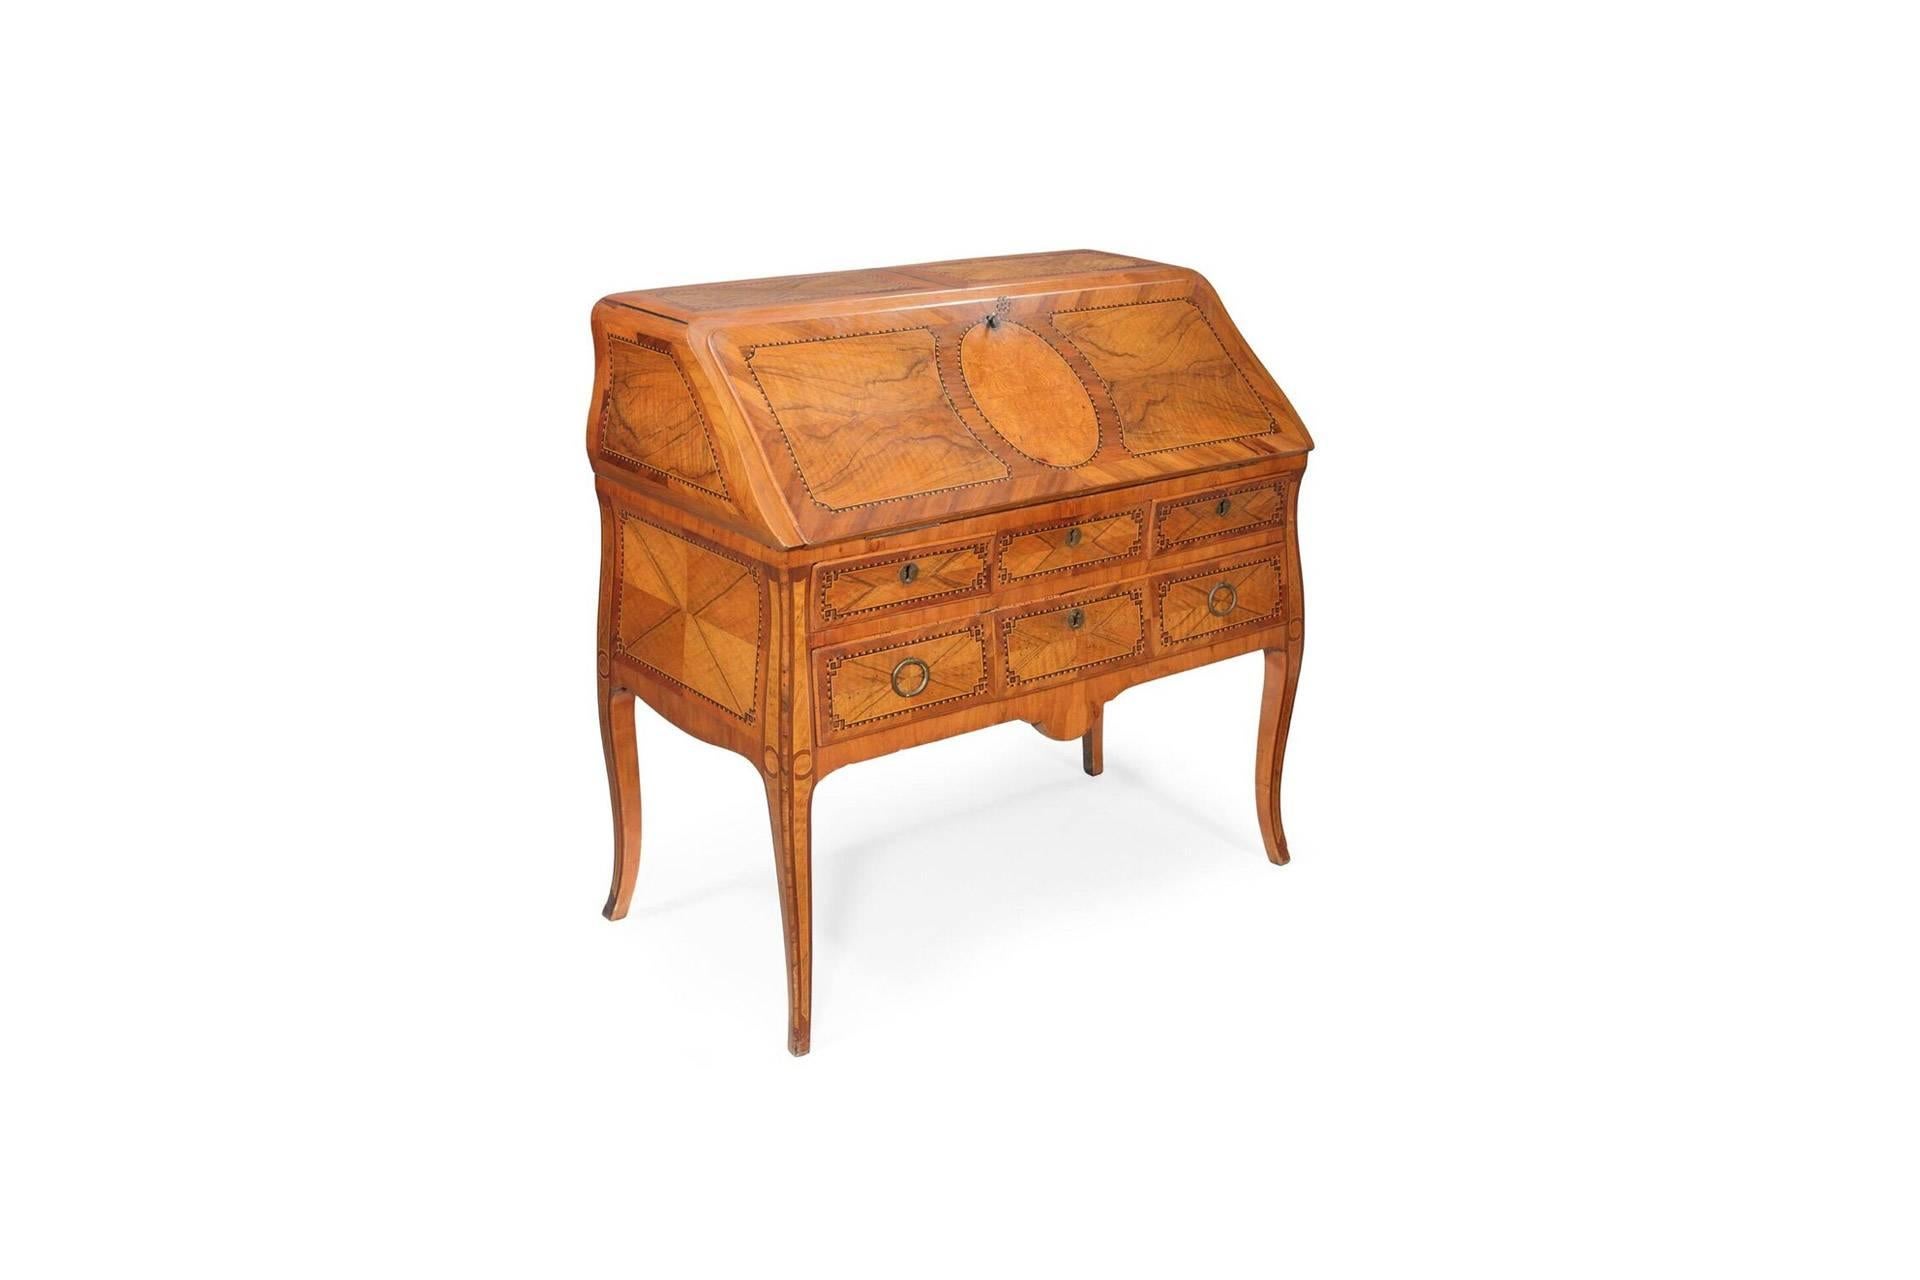 Stunning transition style bureau in walnut, ash and tulipwood. Entirely made with exquisite marquetry details, it has three external drawers and wonderful leather-lined writing top. The interior has five drawers, three sections and a secret